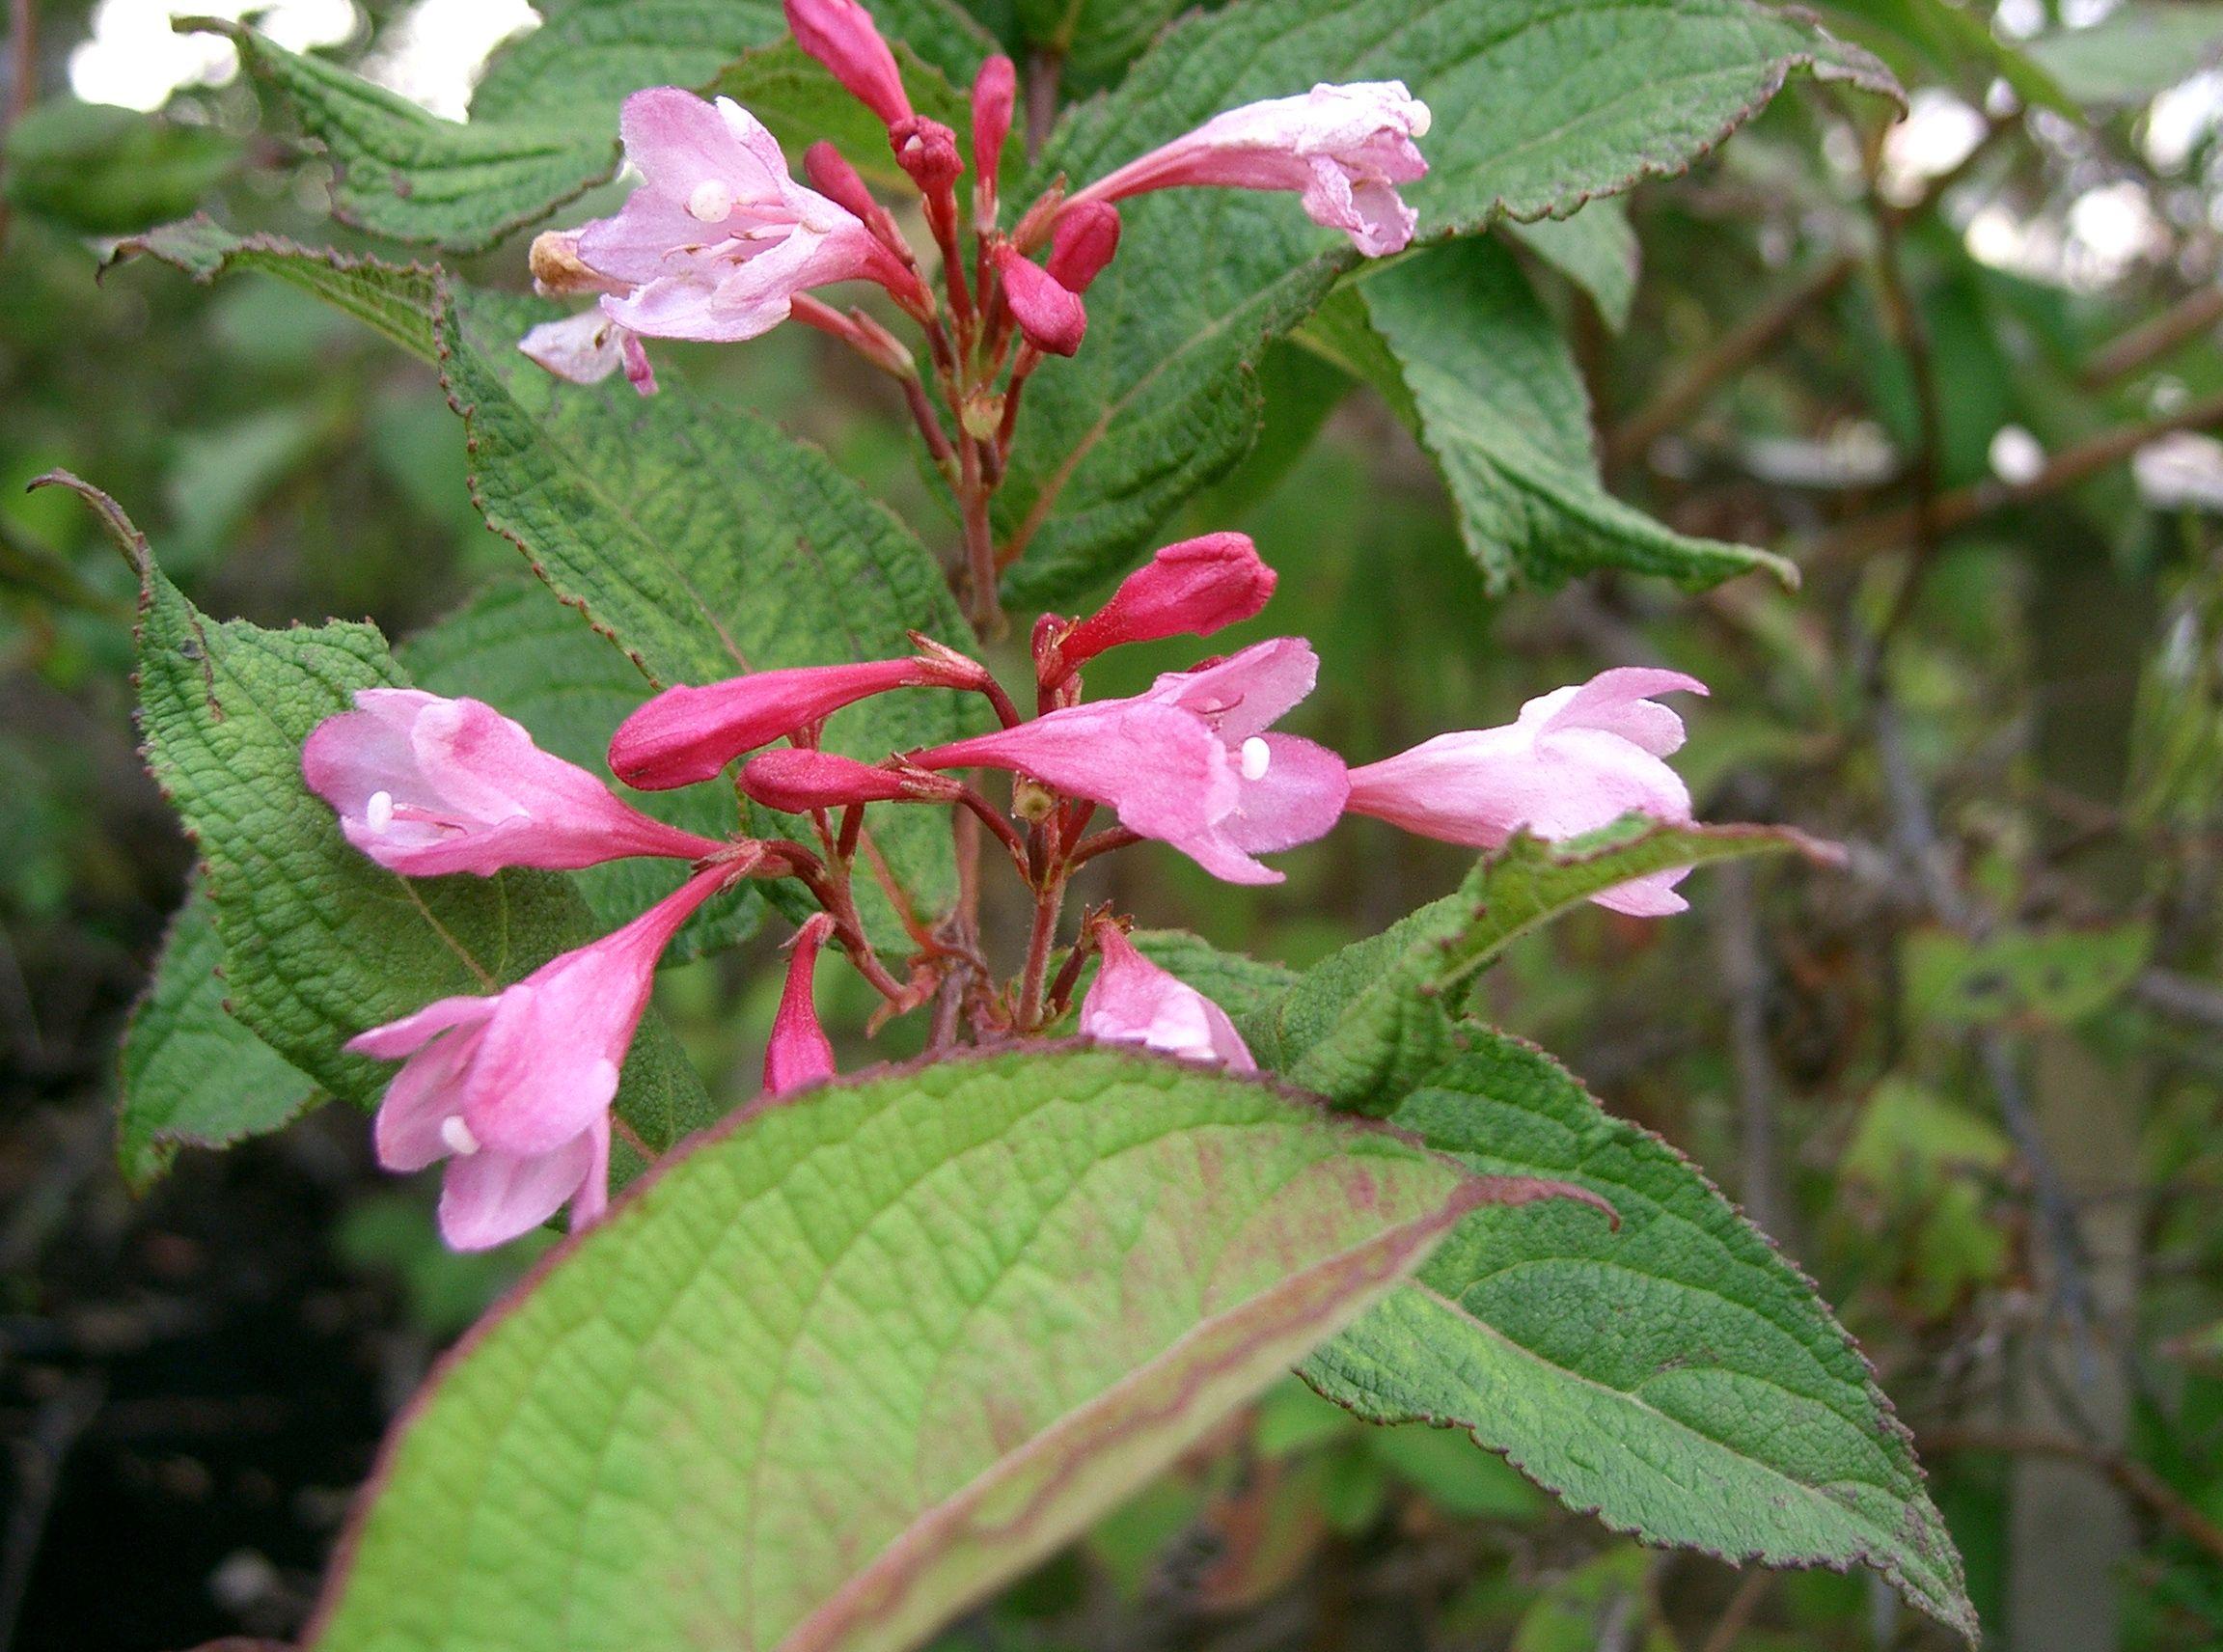 pink-white flowers with green-pink leaves, dark-pink buds, and red stems